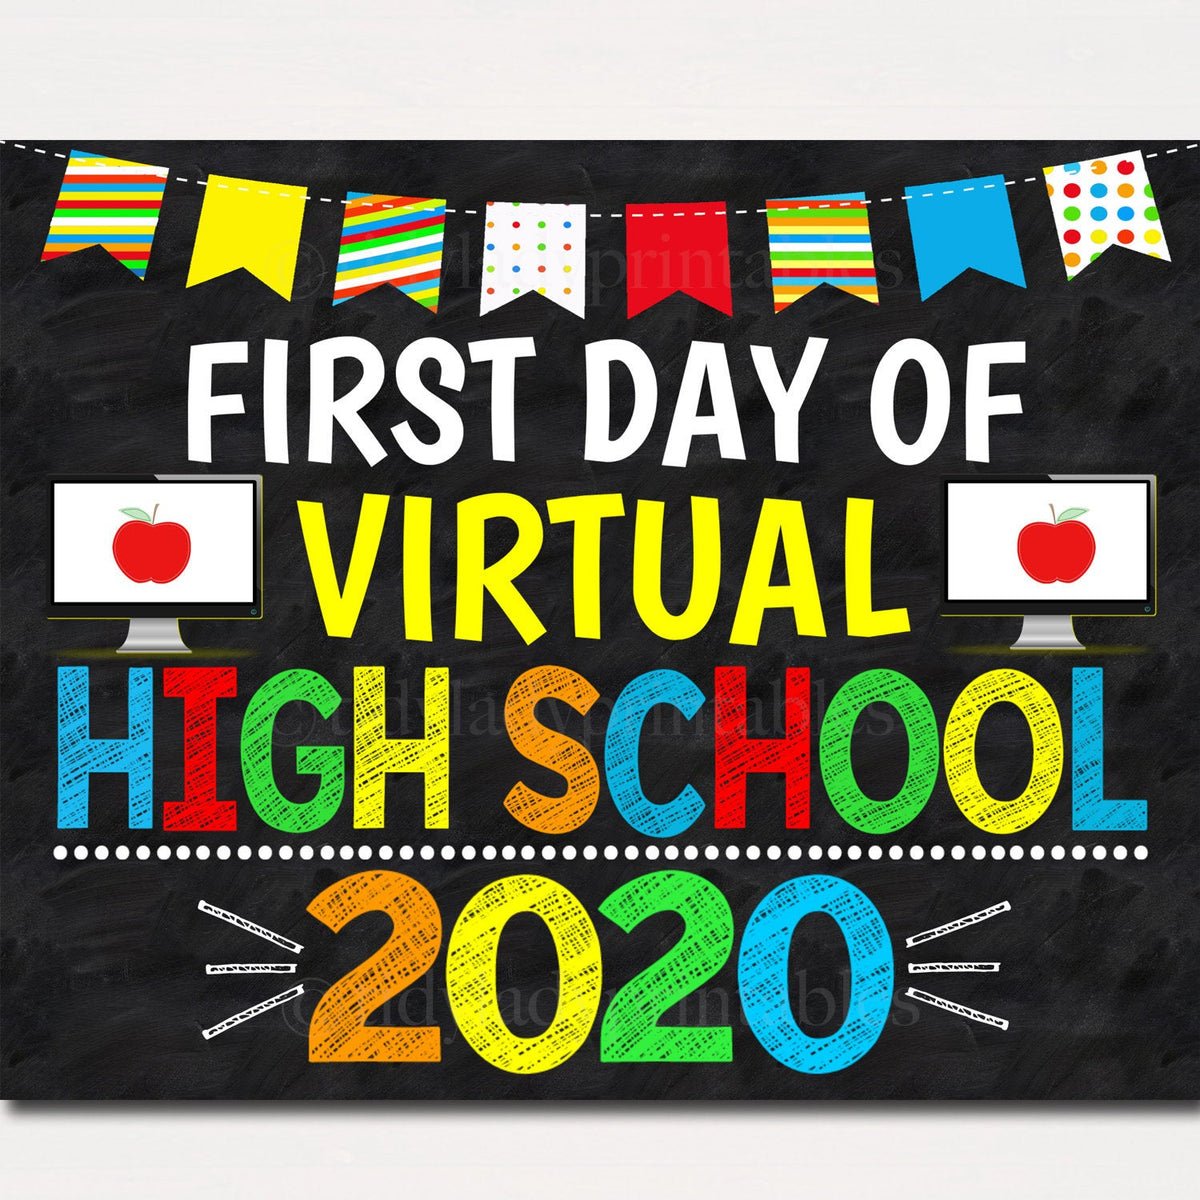 First Day of Virtual High School 2020 | TidyLady Printables